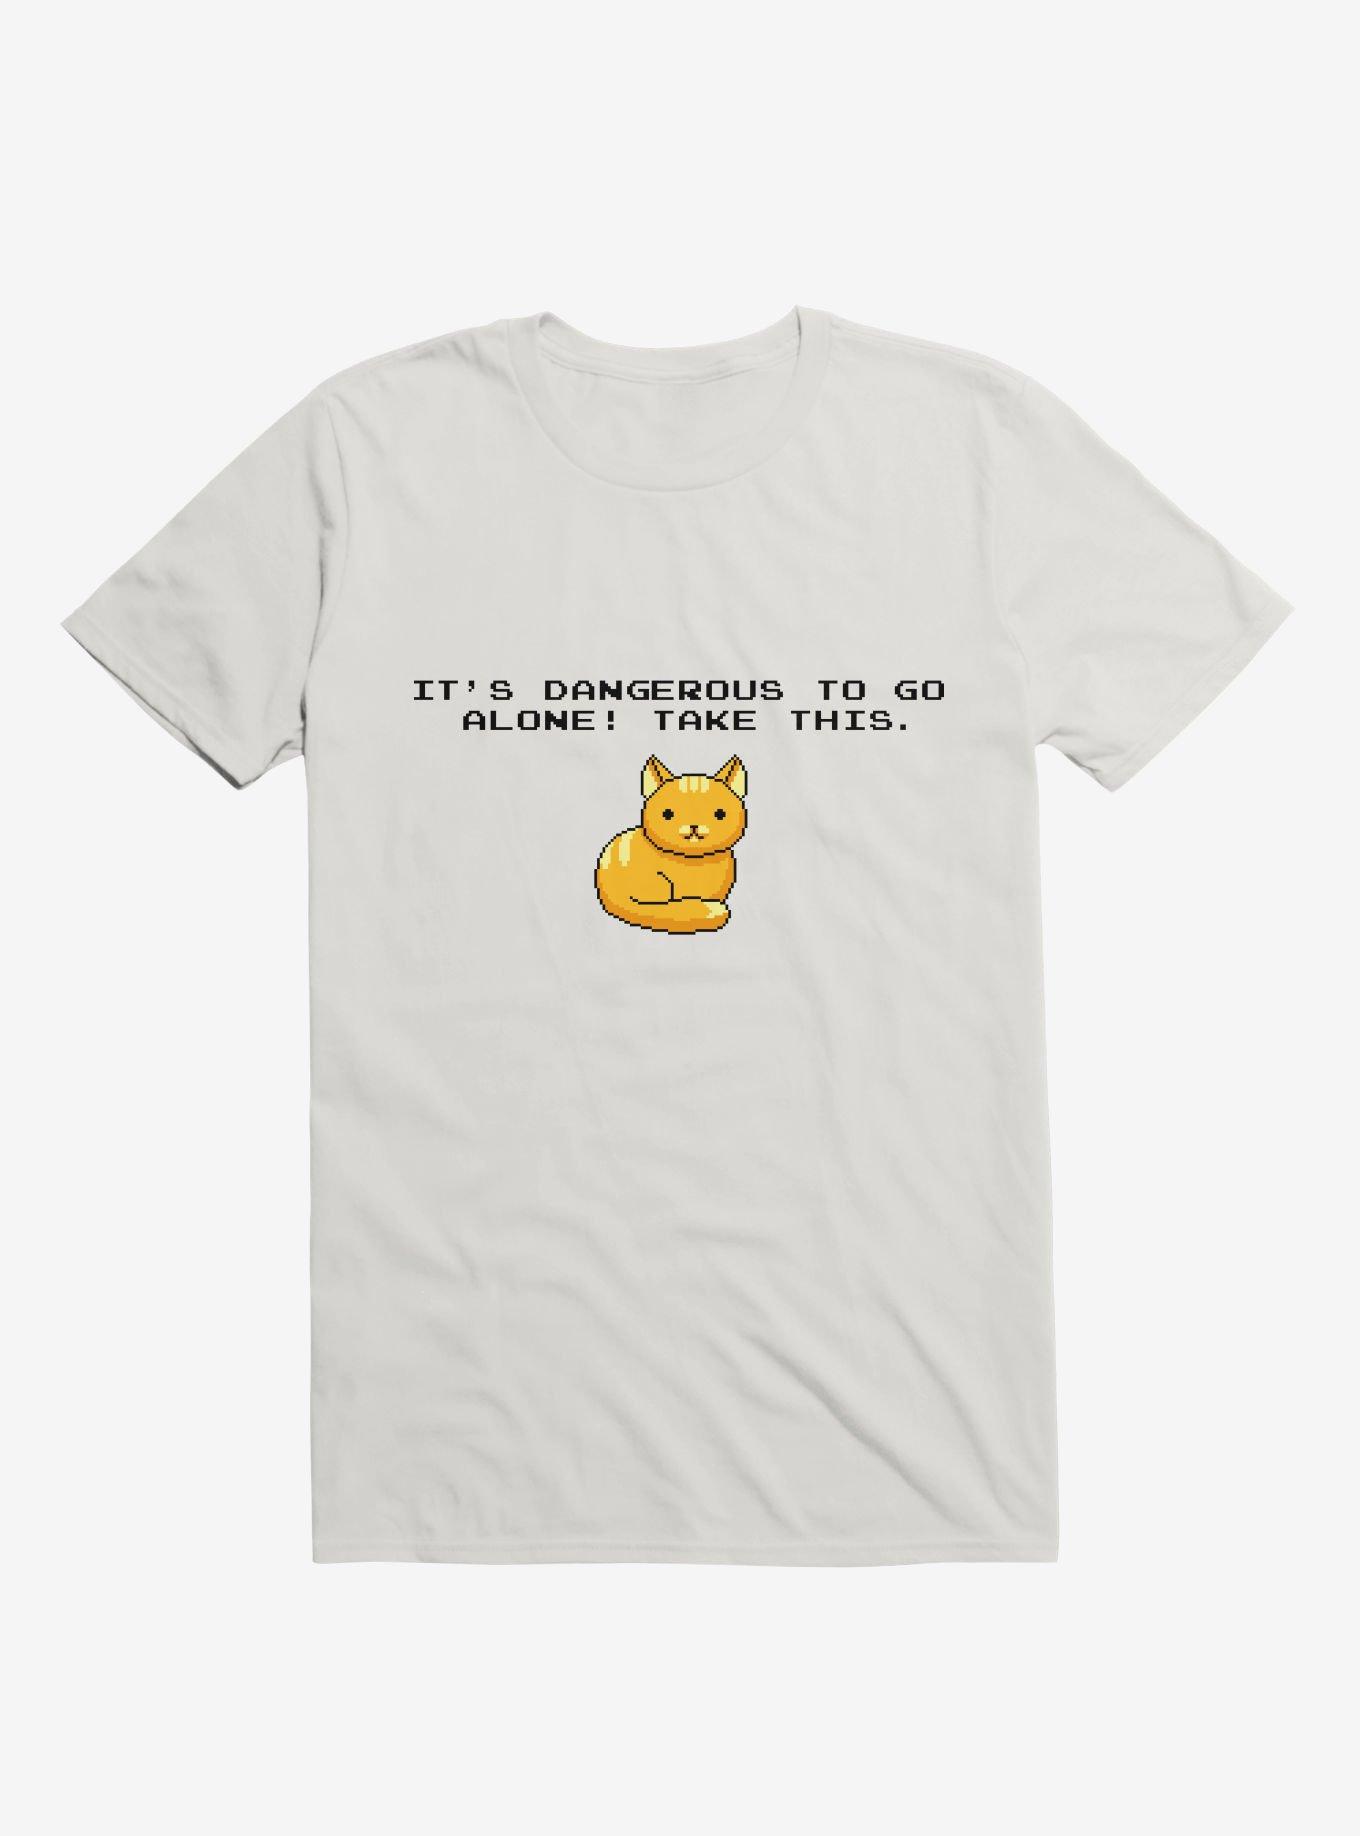 It's Dangerous To Go Alone, Take This! Cat White T-Shirt, WHITE, hi-res